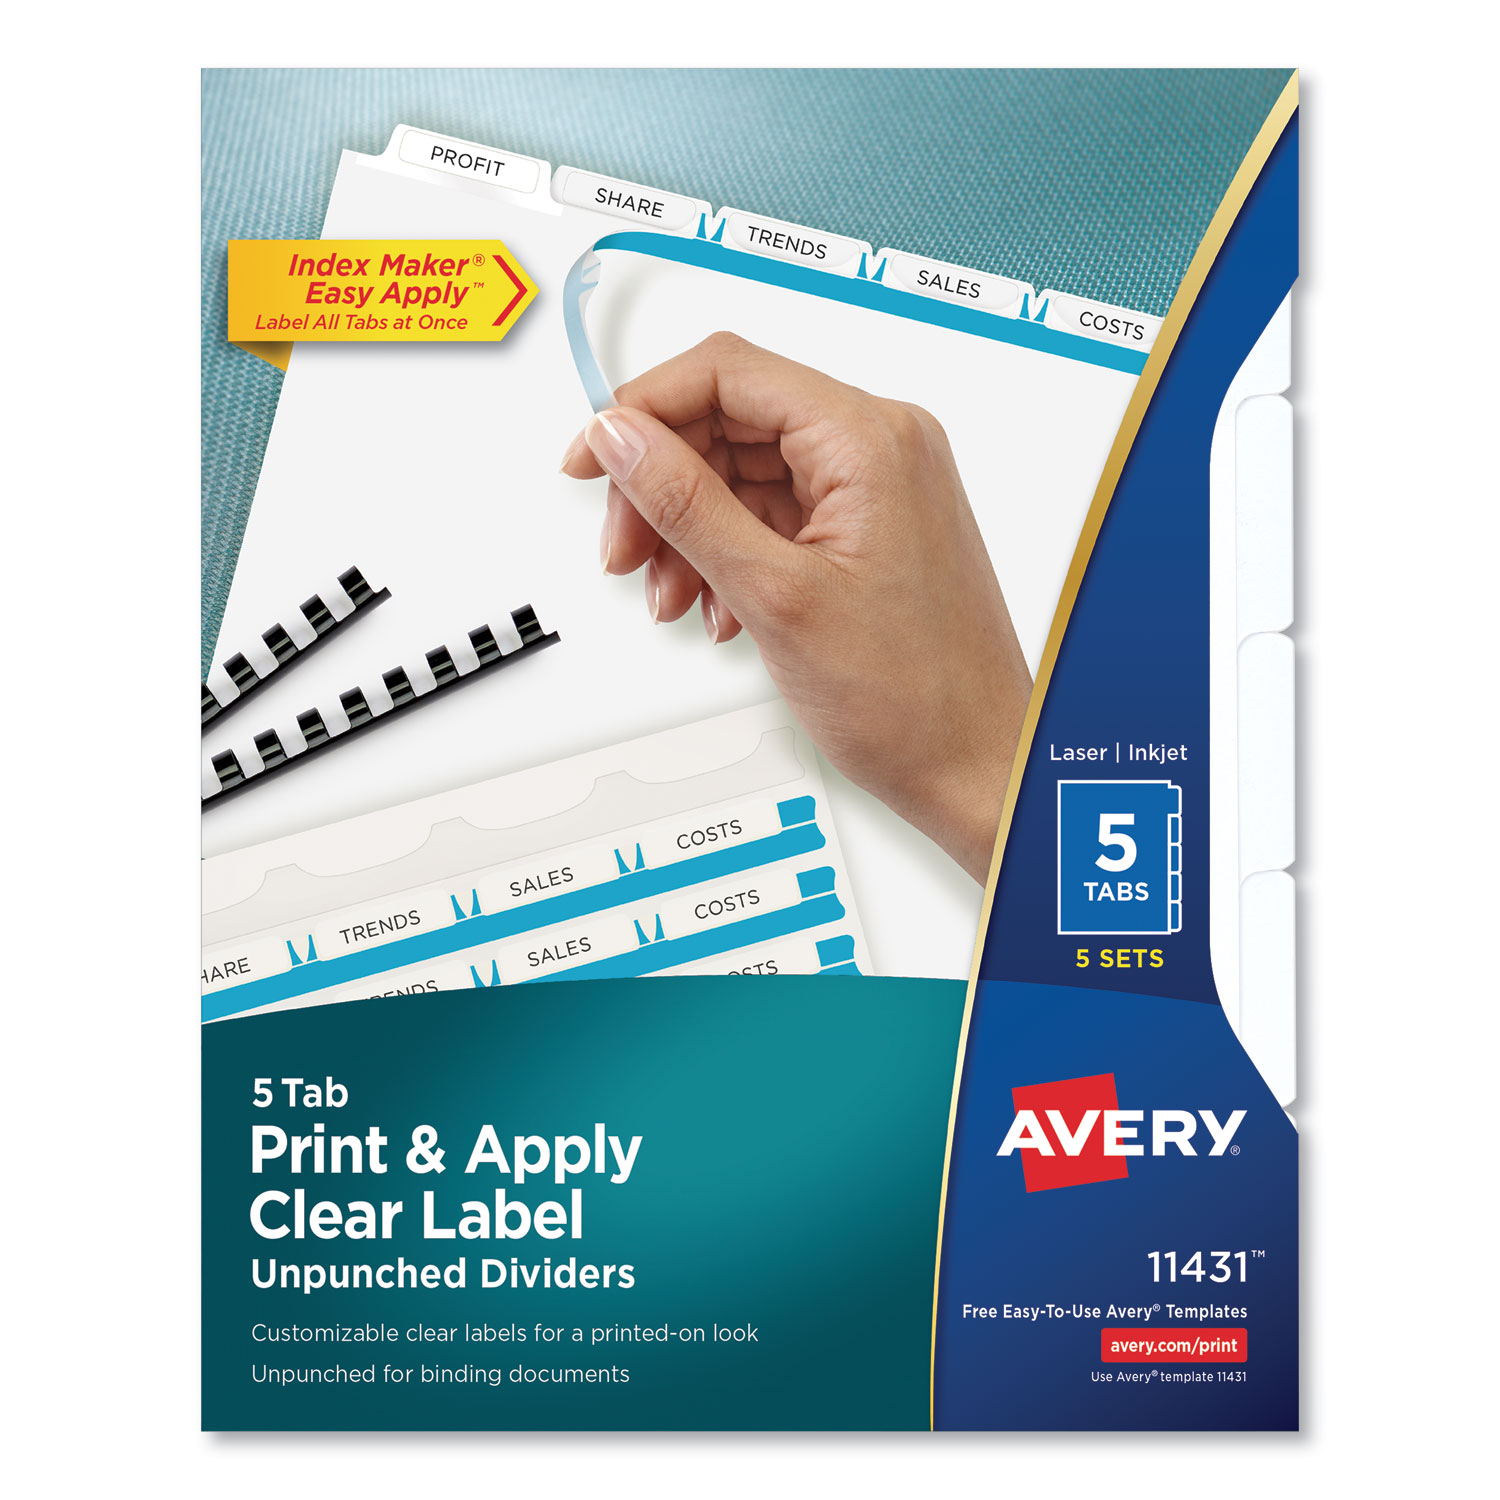  Avery 11431 Print and Apply Index Maker Clear Label Unpunched Dividers, 5Tab, Letter, 5 Sets (AVE11431) 